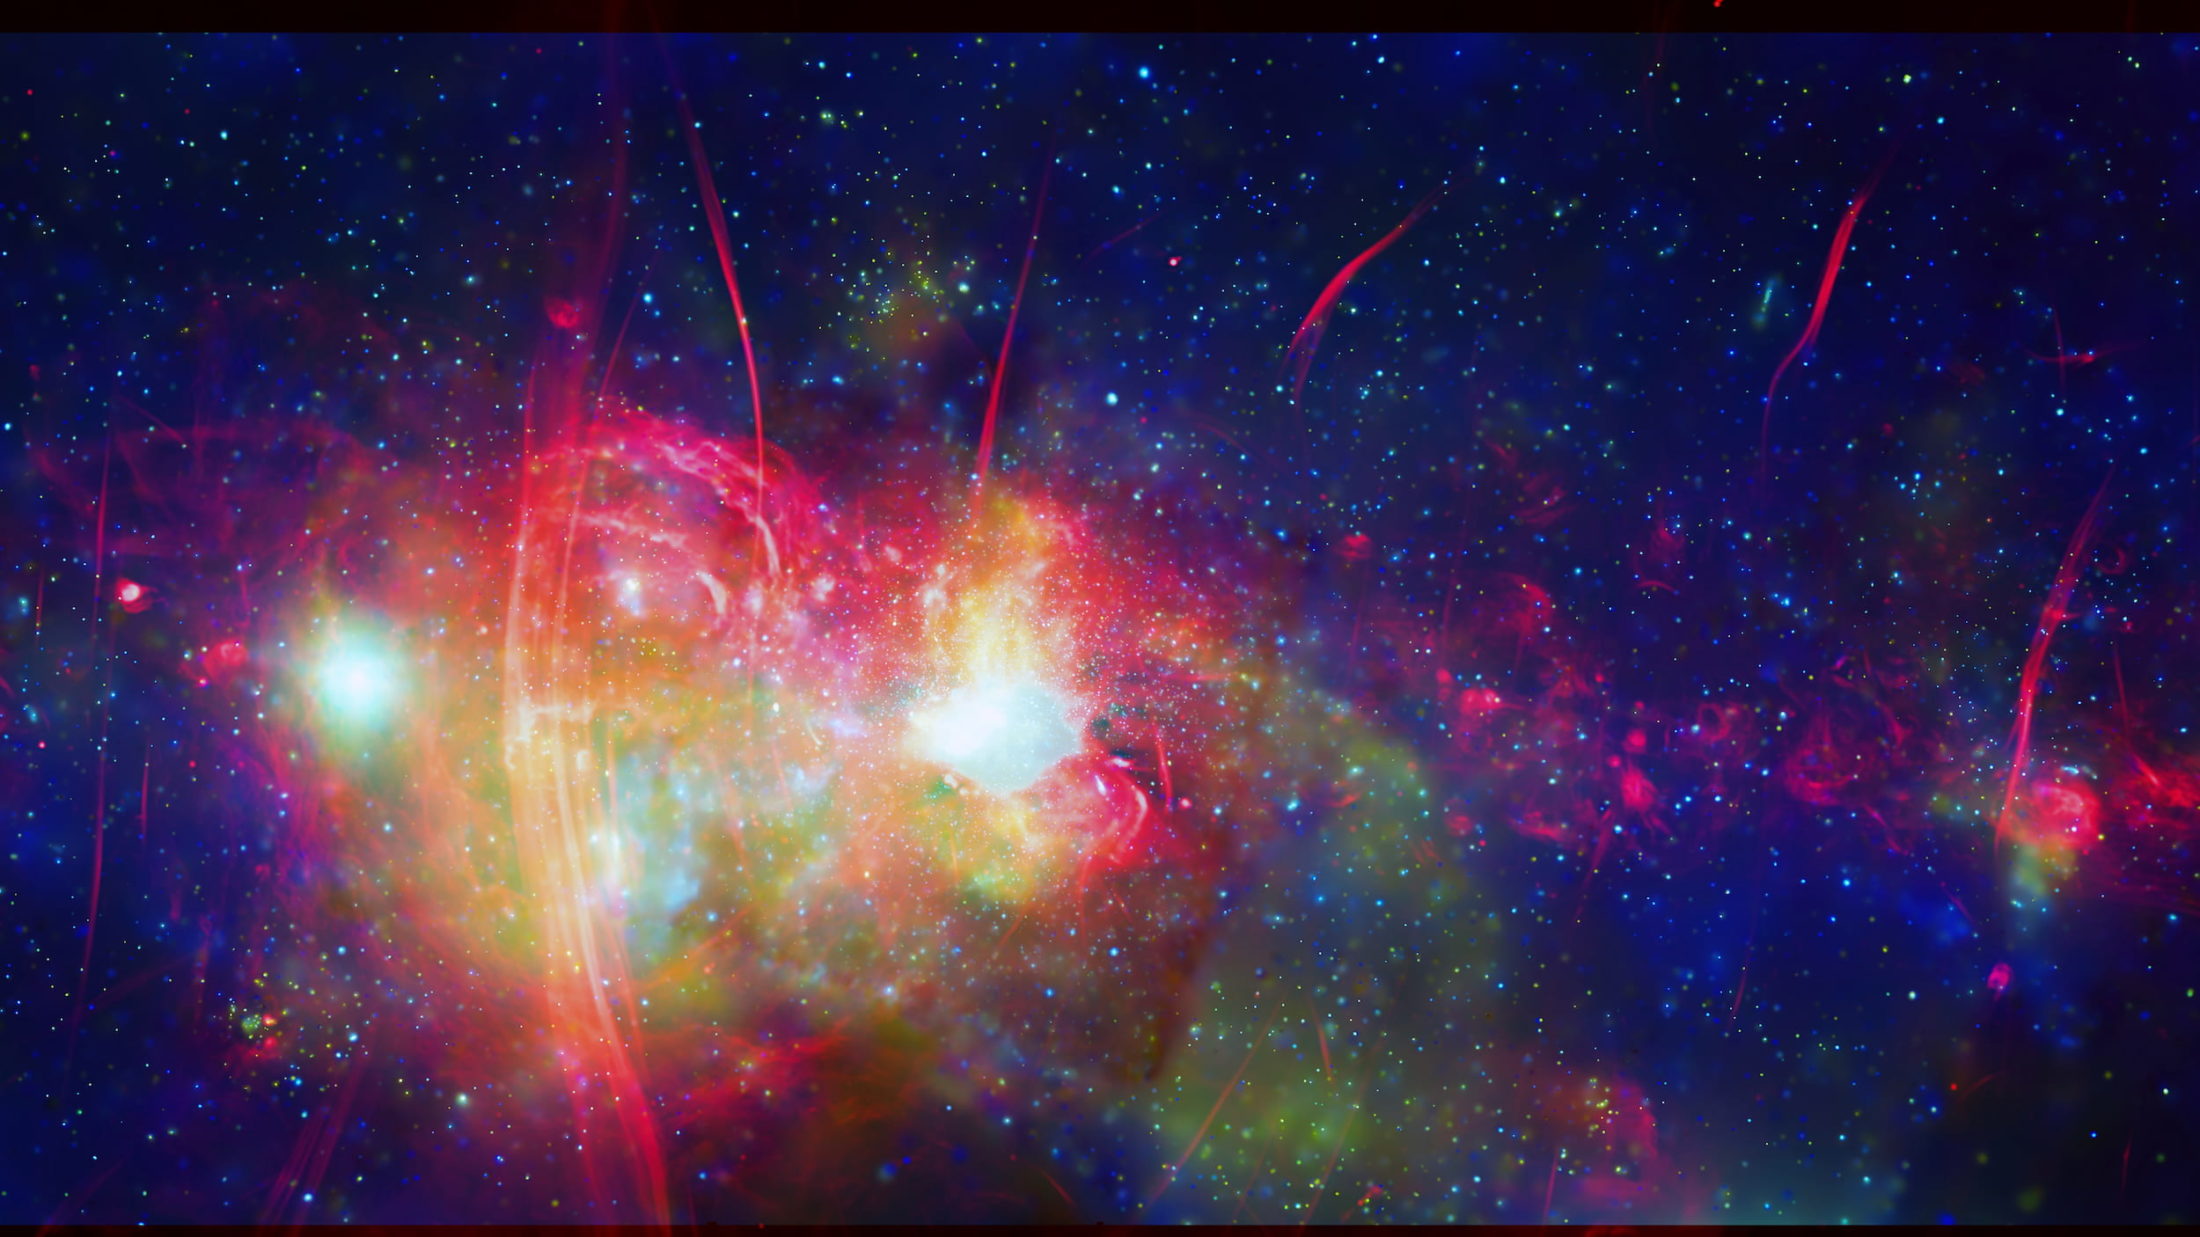 Milky Way galaxy colored in red, yellow, and blue, provided by NASA.